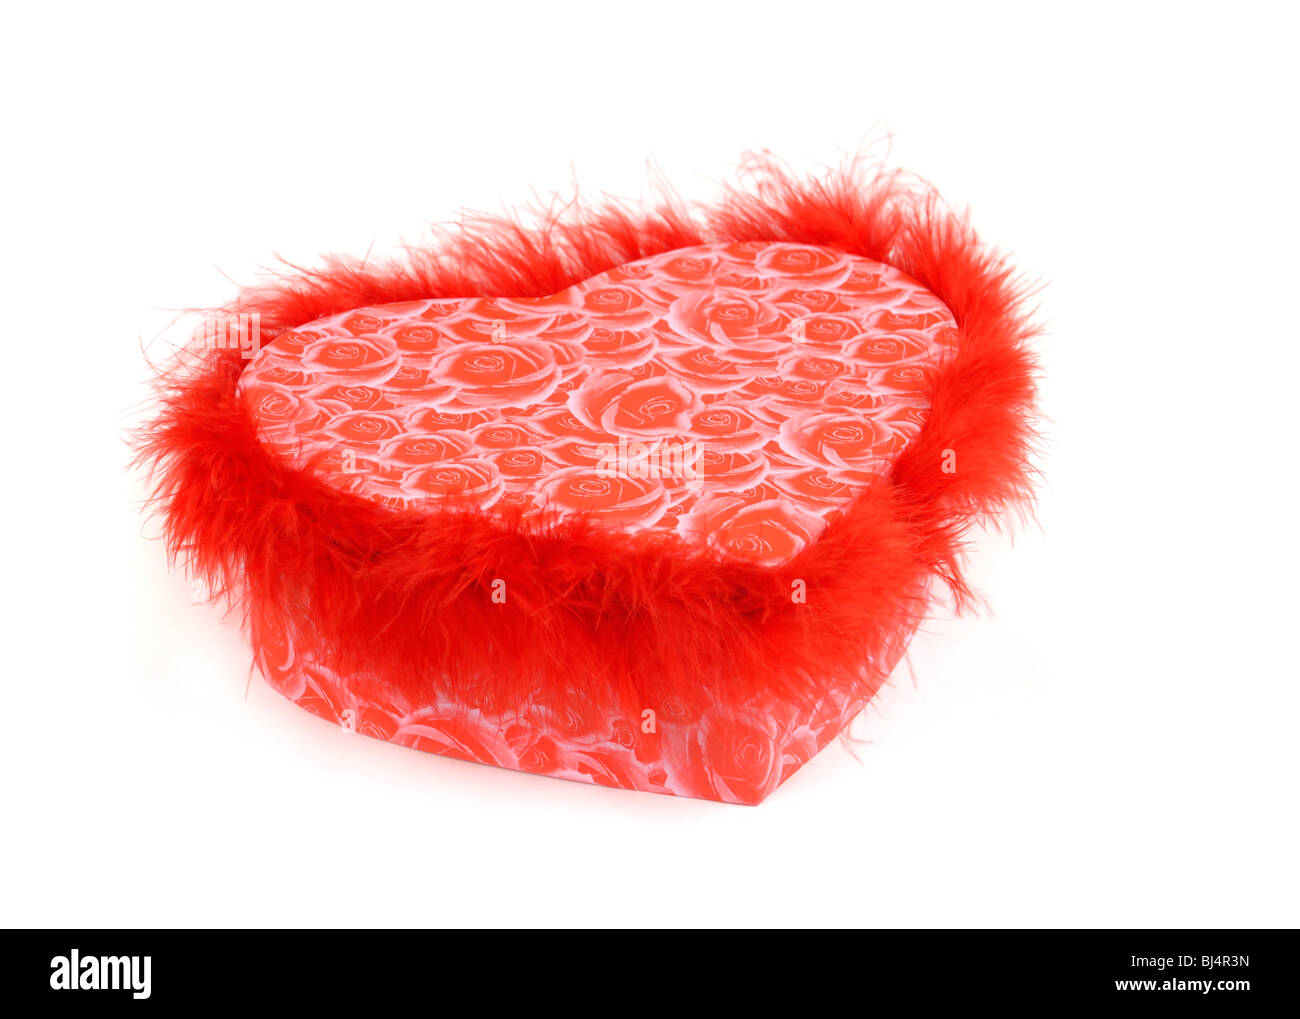 Lovely heart-shaped red fancy box isolated silhouette on white background. Valentine's Day gift concept Stock Photo